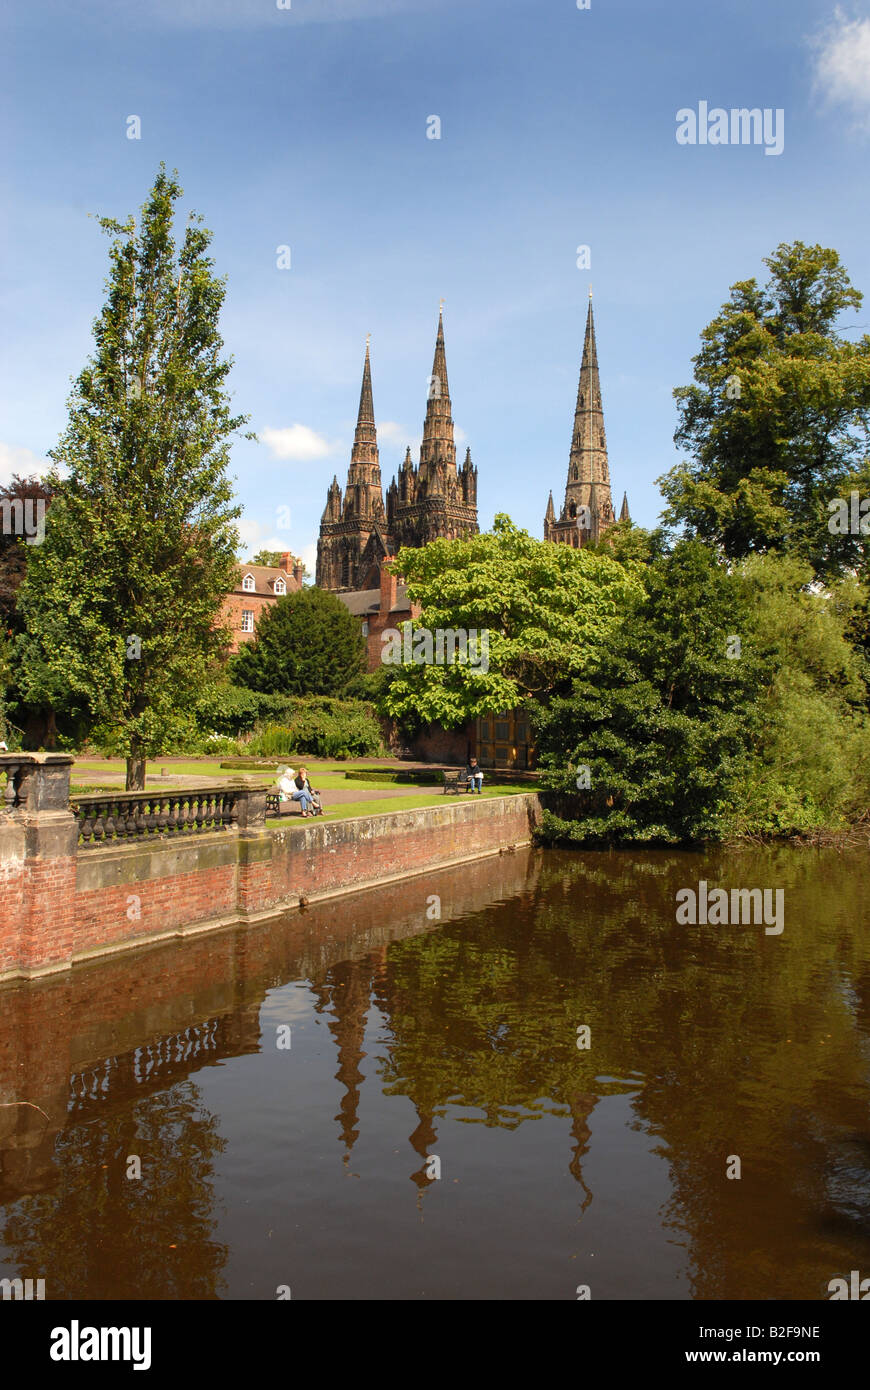 The three spires of Lichfield Cathedral in Staffordshire England Stock Photo